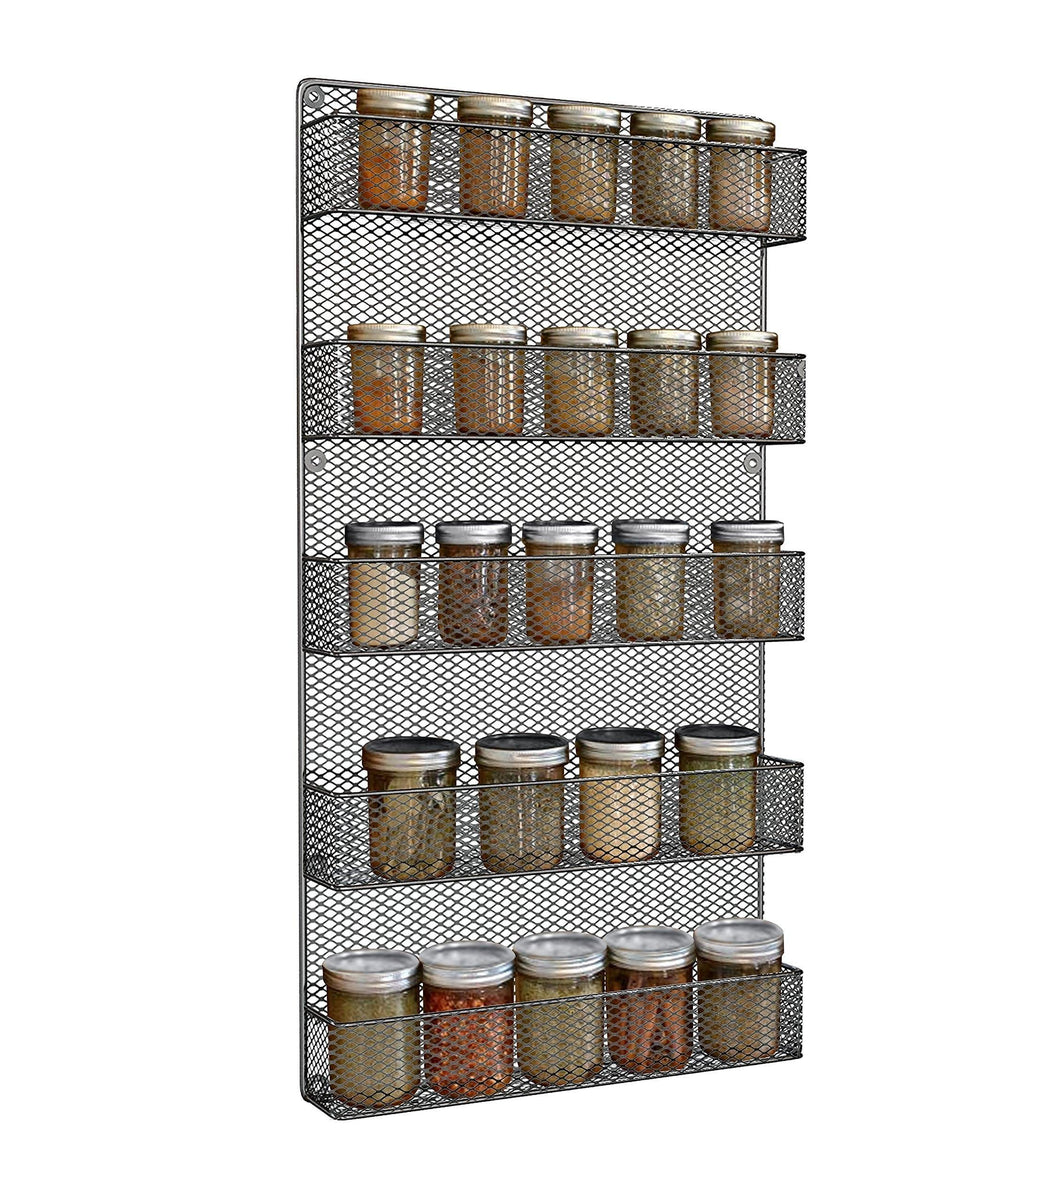 Spice Rack Wall Mount- Spice Rack Organizer- Use as a Wall Mounted Spice Rack- Great Storage Capacity for Kitchen Spicy Shelf- The Best Spice Rack -5 Tier Shelves